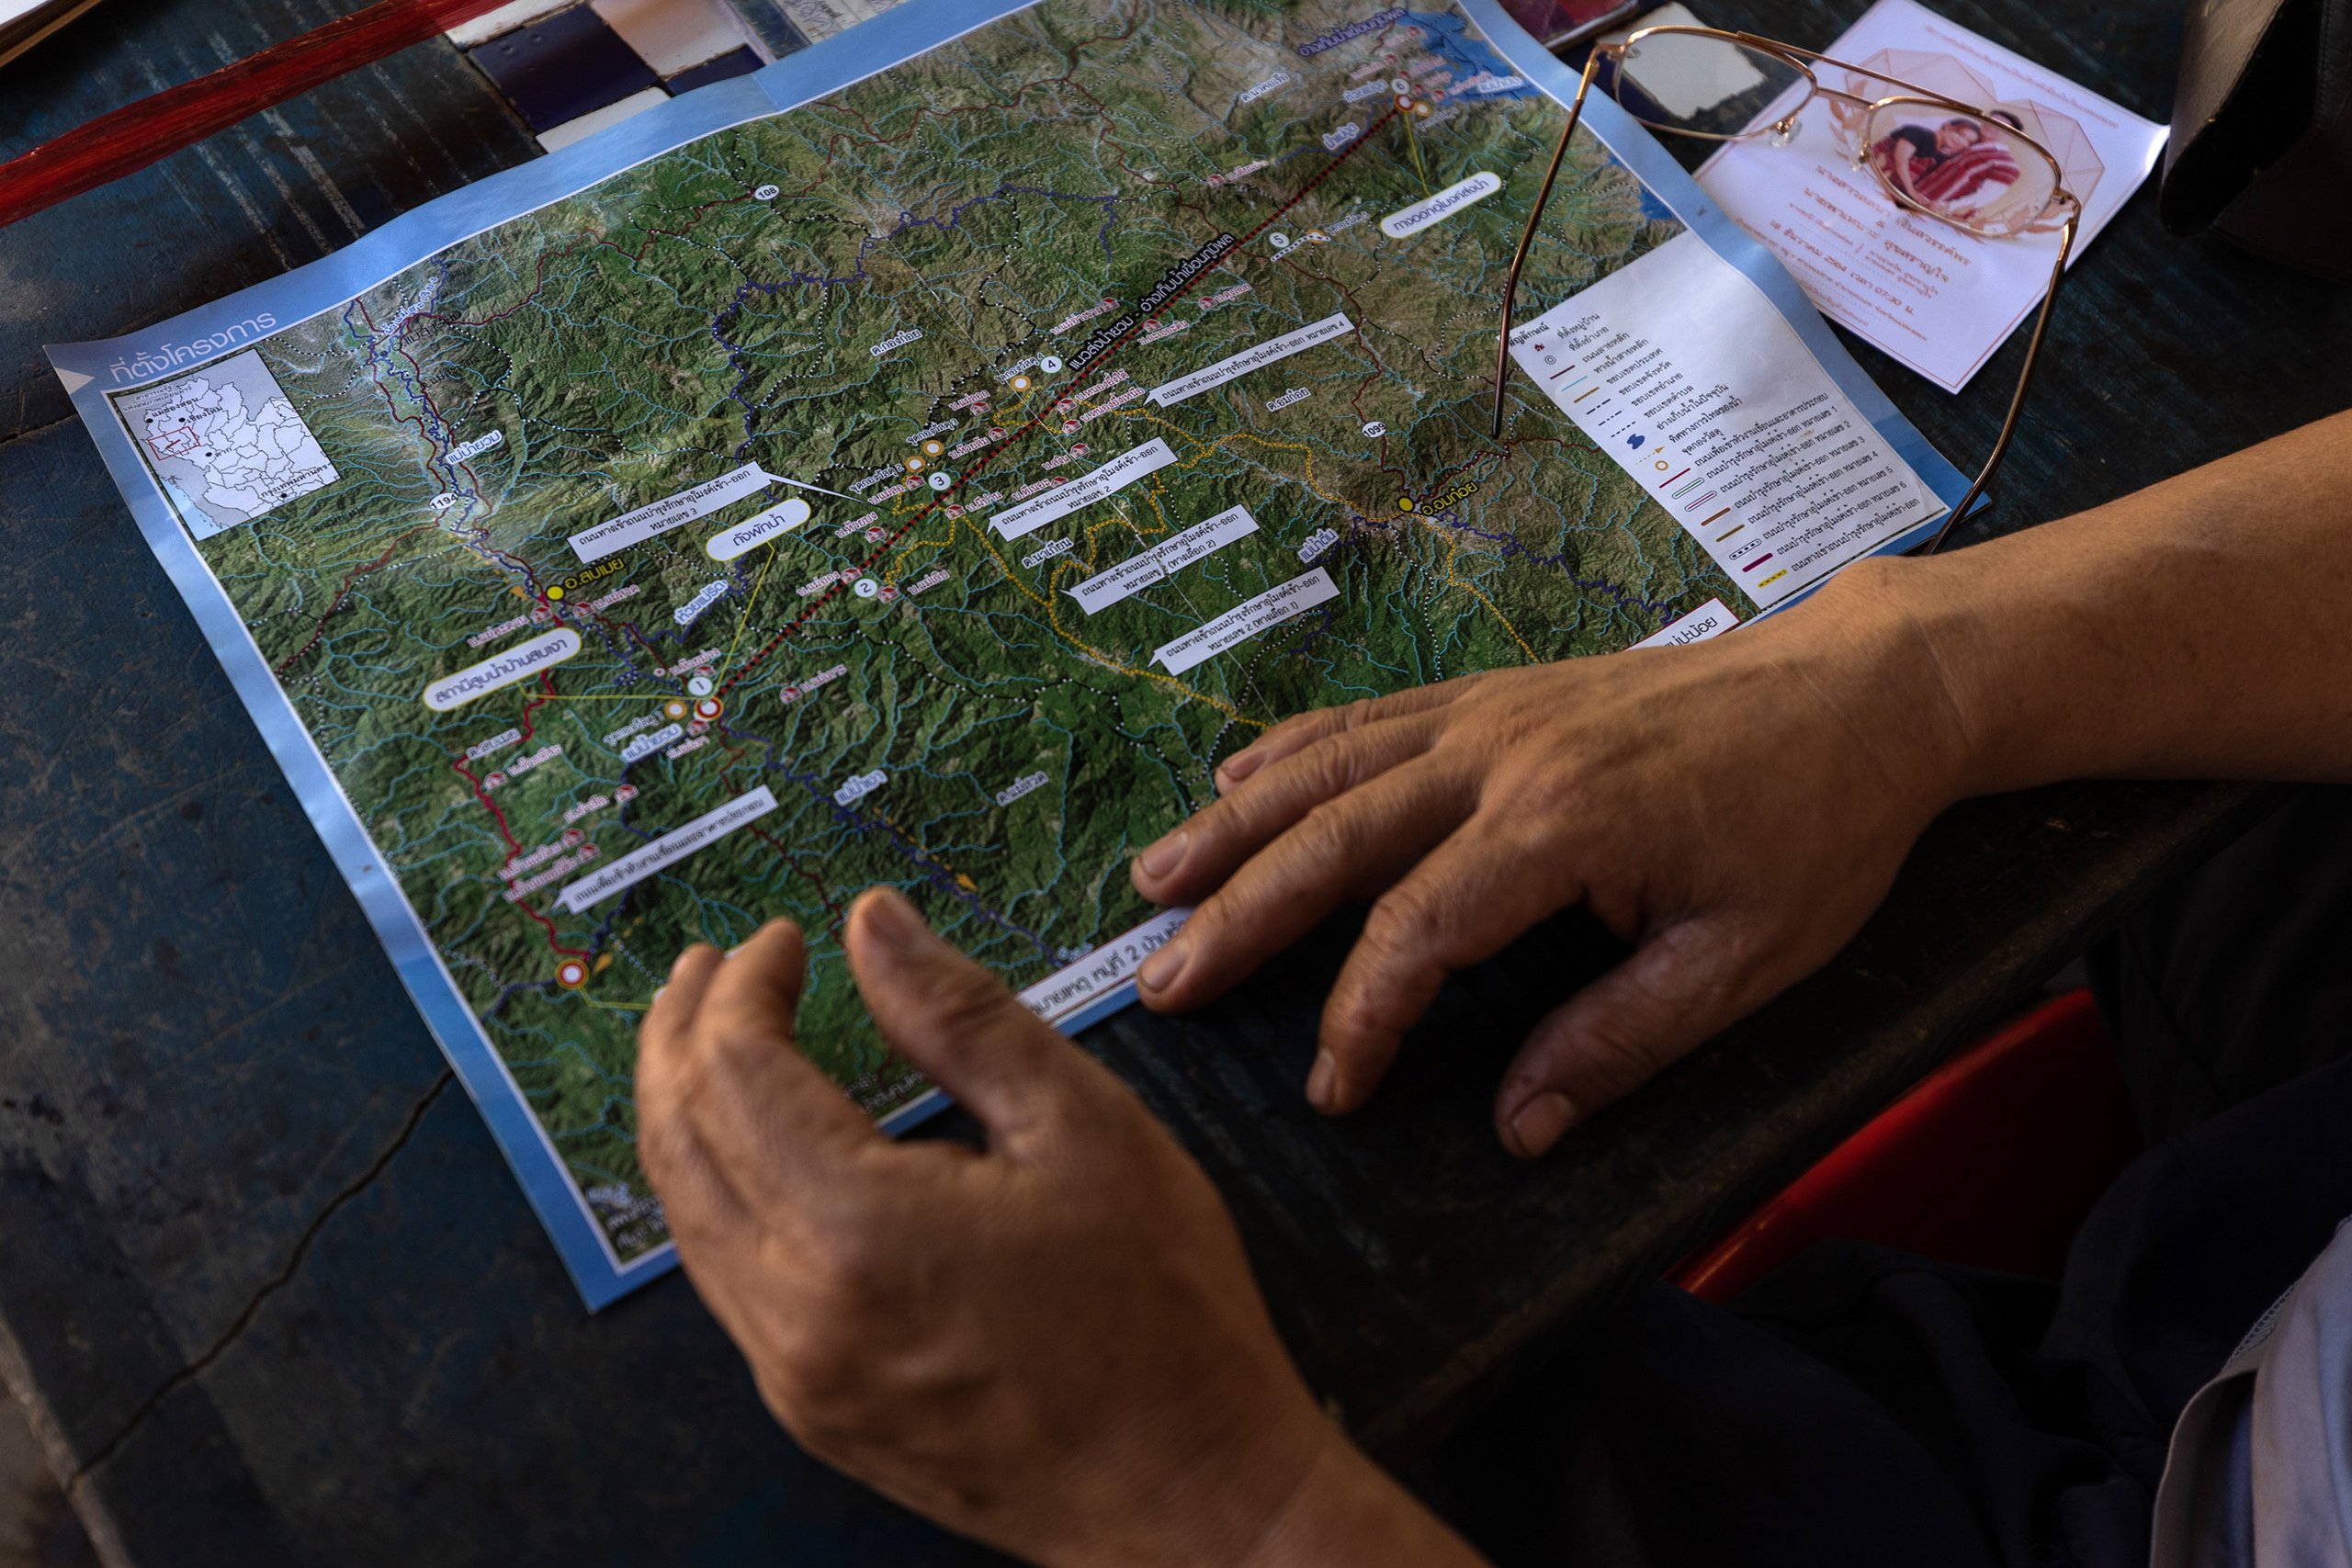 Thongchai Leawpichaipaibul, 52, a shop owner in Mae Ngaw, looks at a map of the diversion tunnel.